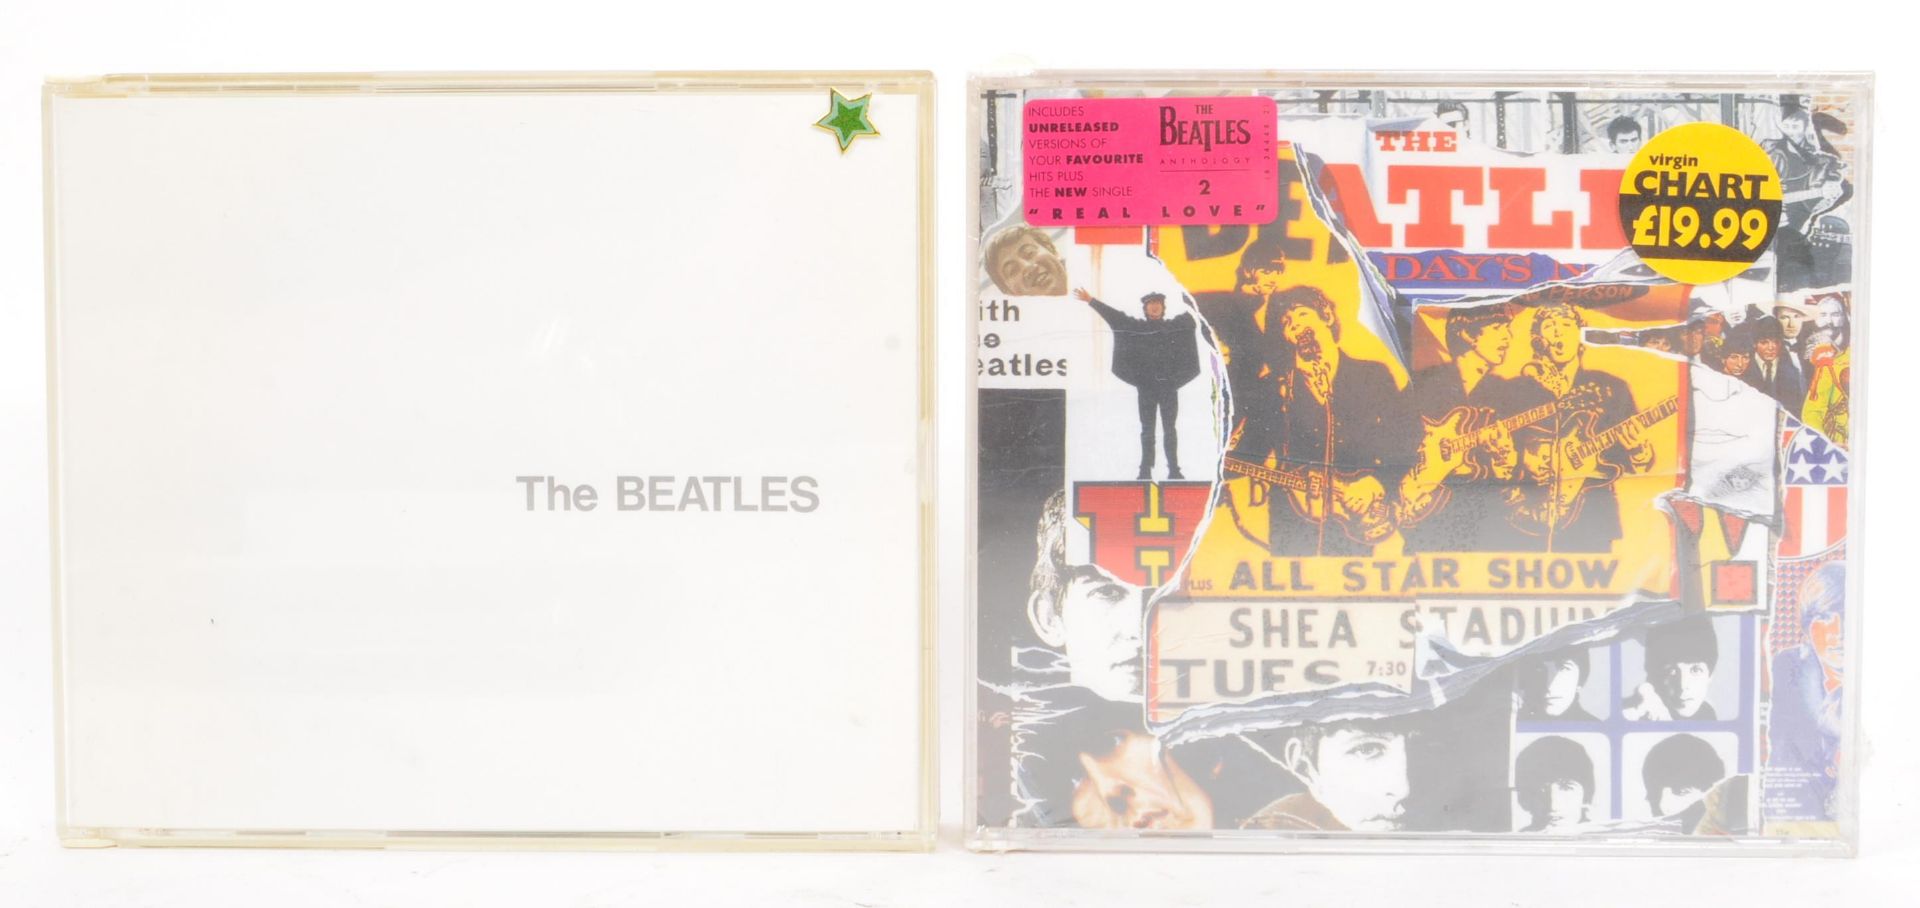 THE BEATLES - COLLECTION OF COMPACT DISC ALBUM & SINGLE - Image 4 of 7